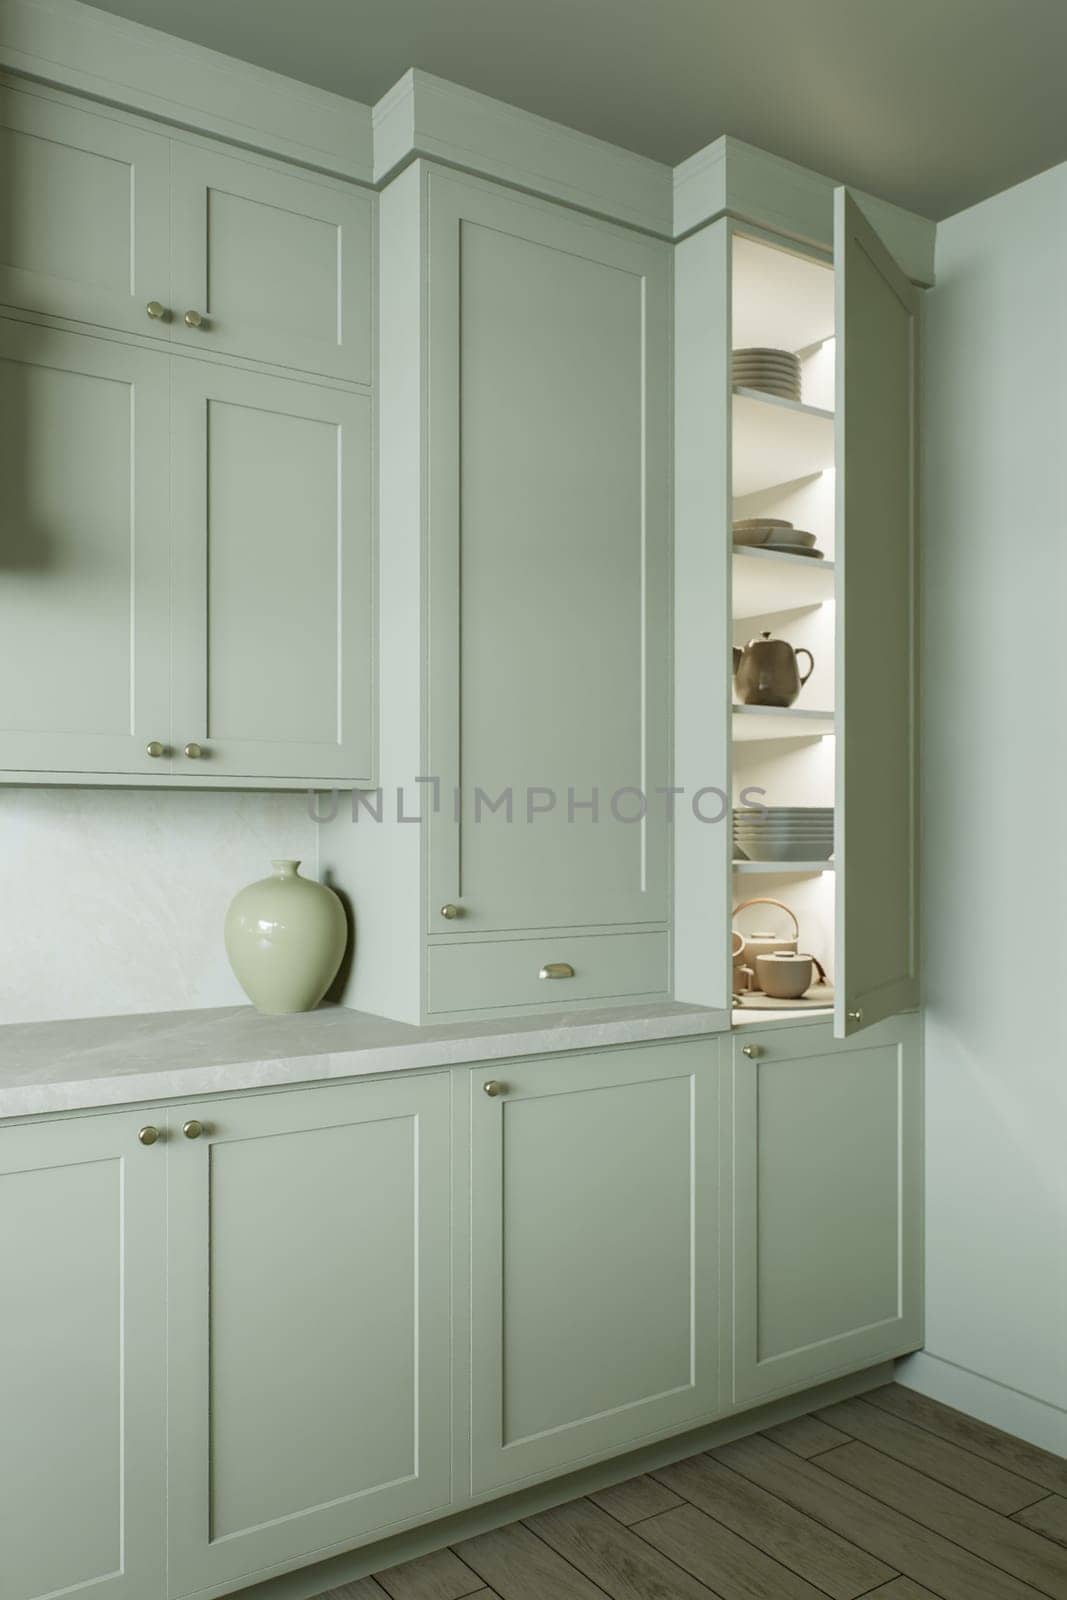 Kitchen cabinets with shelves and utensils in a traditional kitchen interior. by N_Design